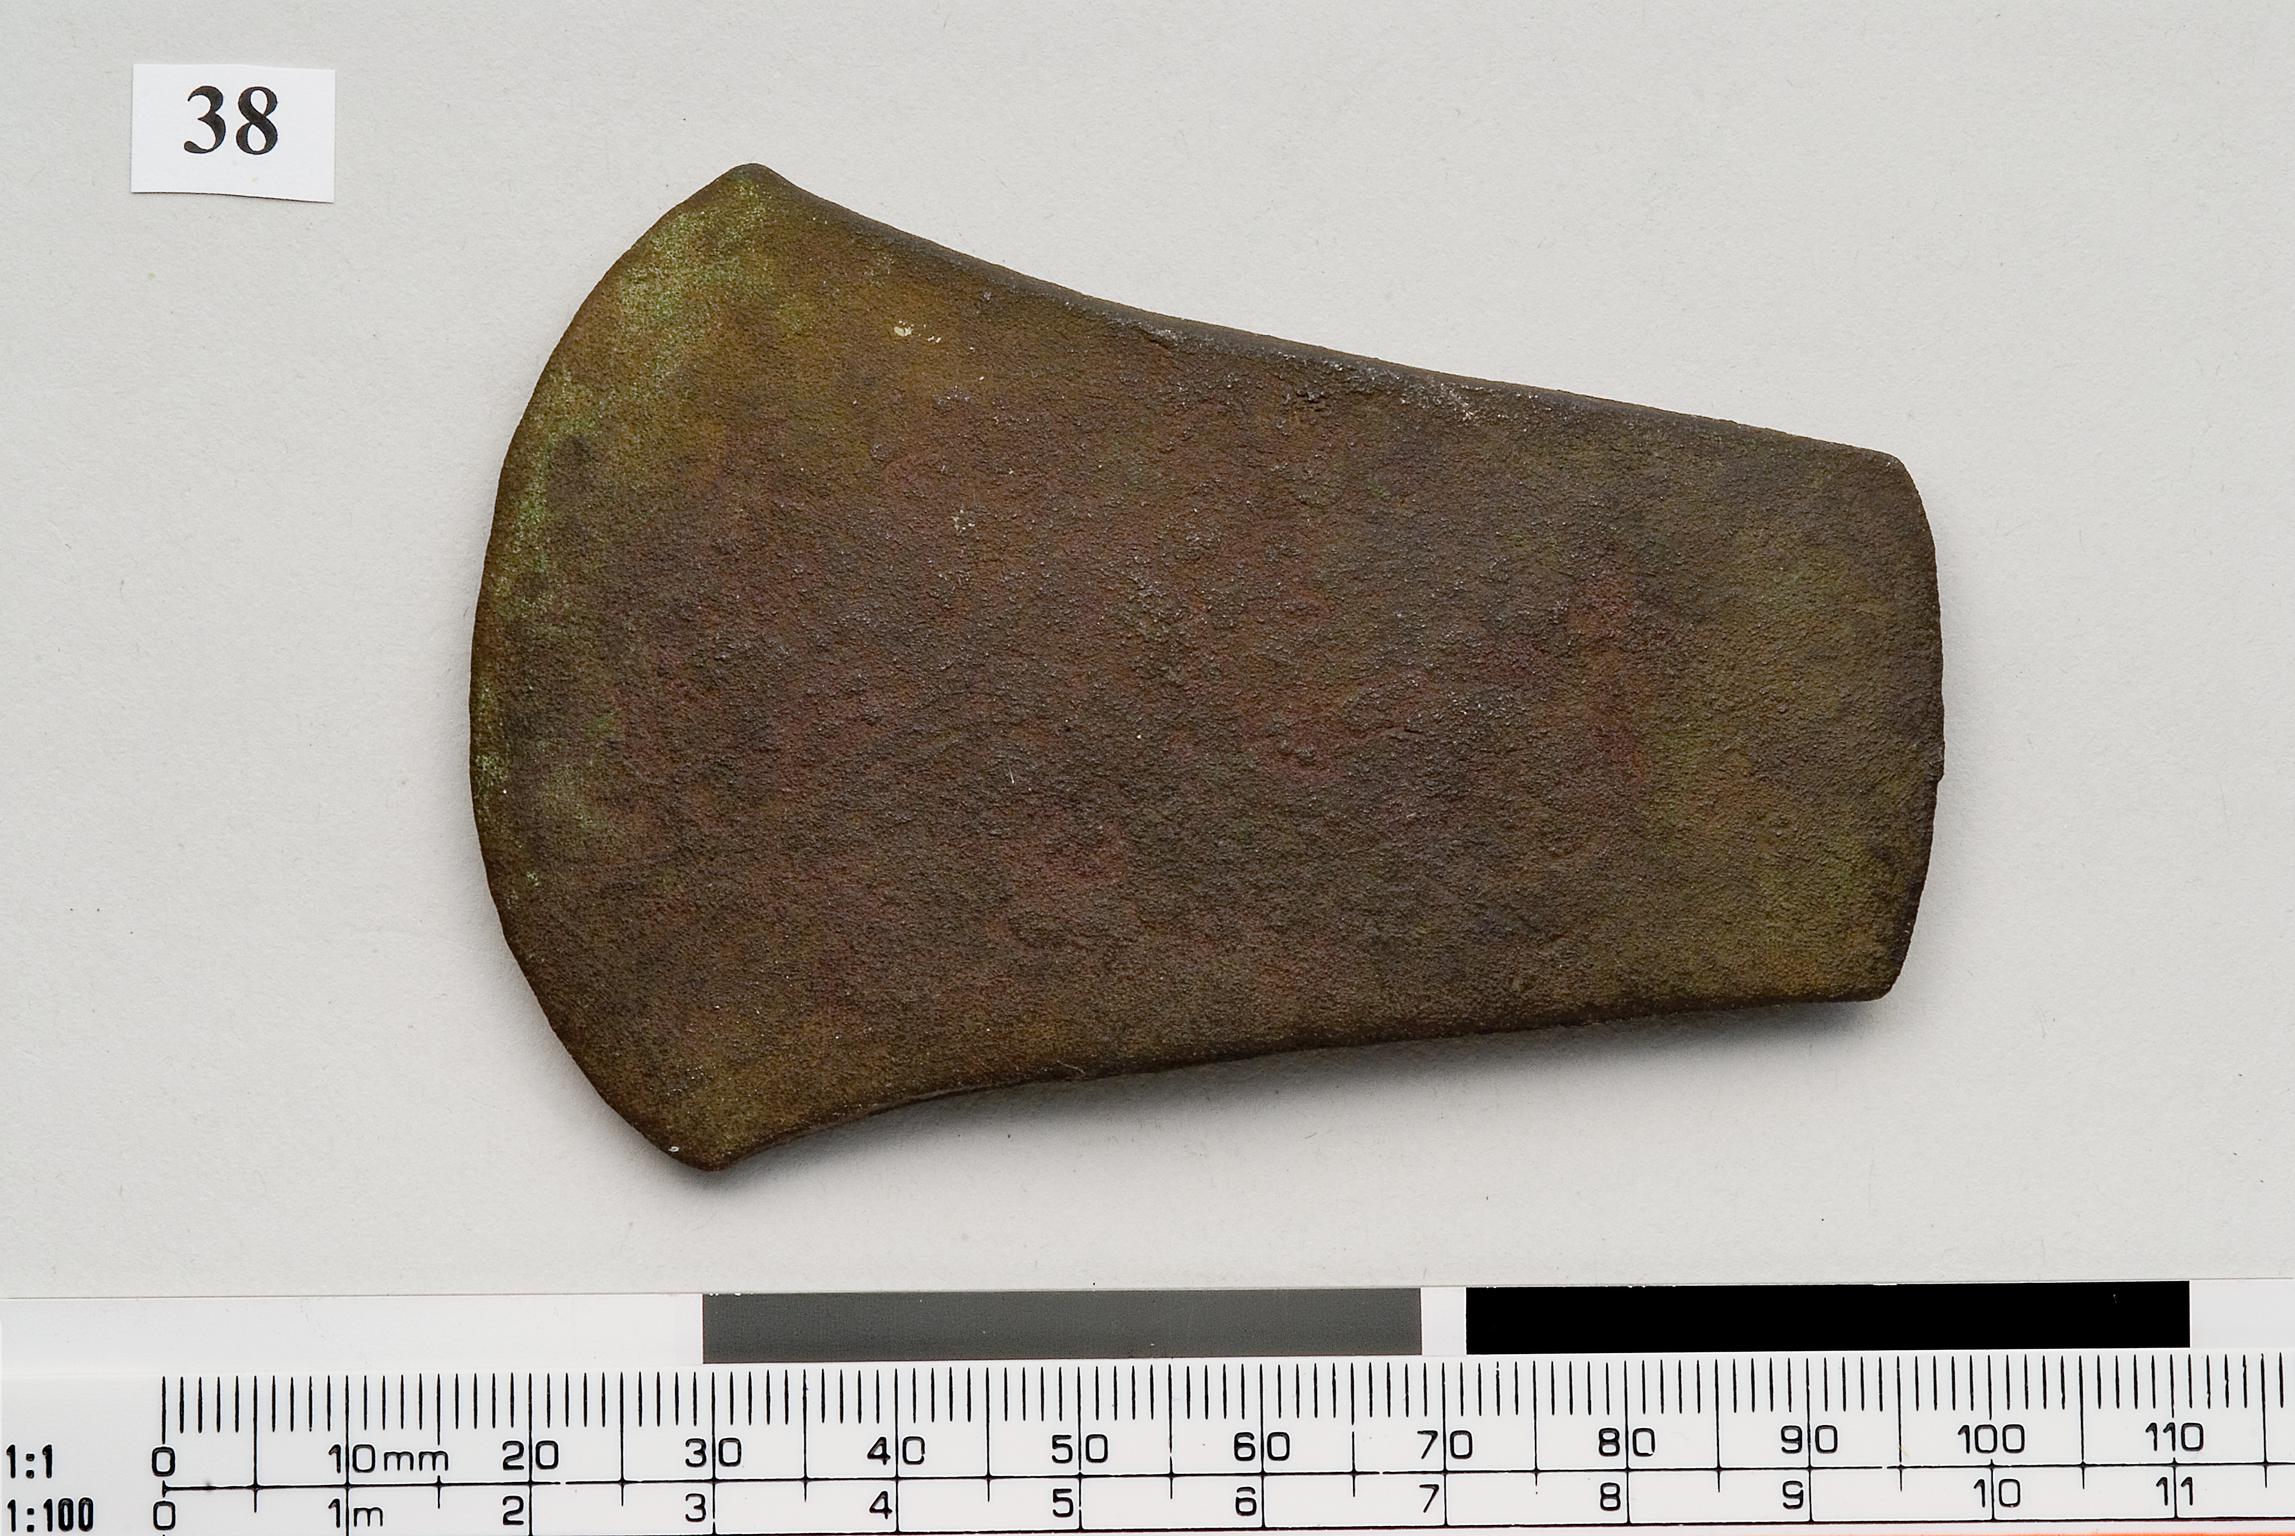 Late Neolithic / Early Bronze Age copper axe